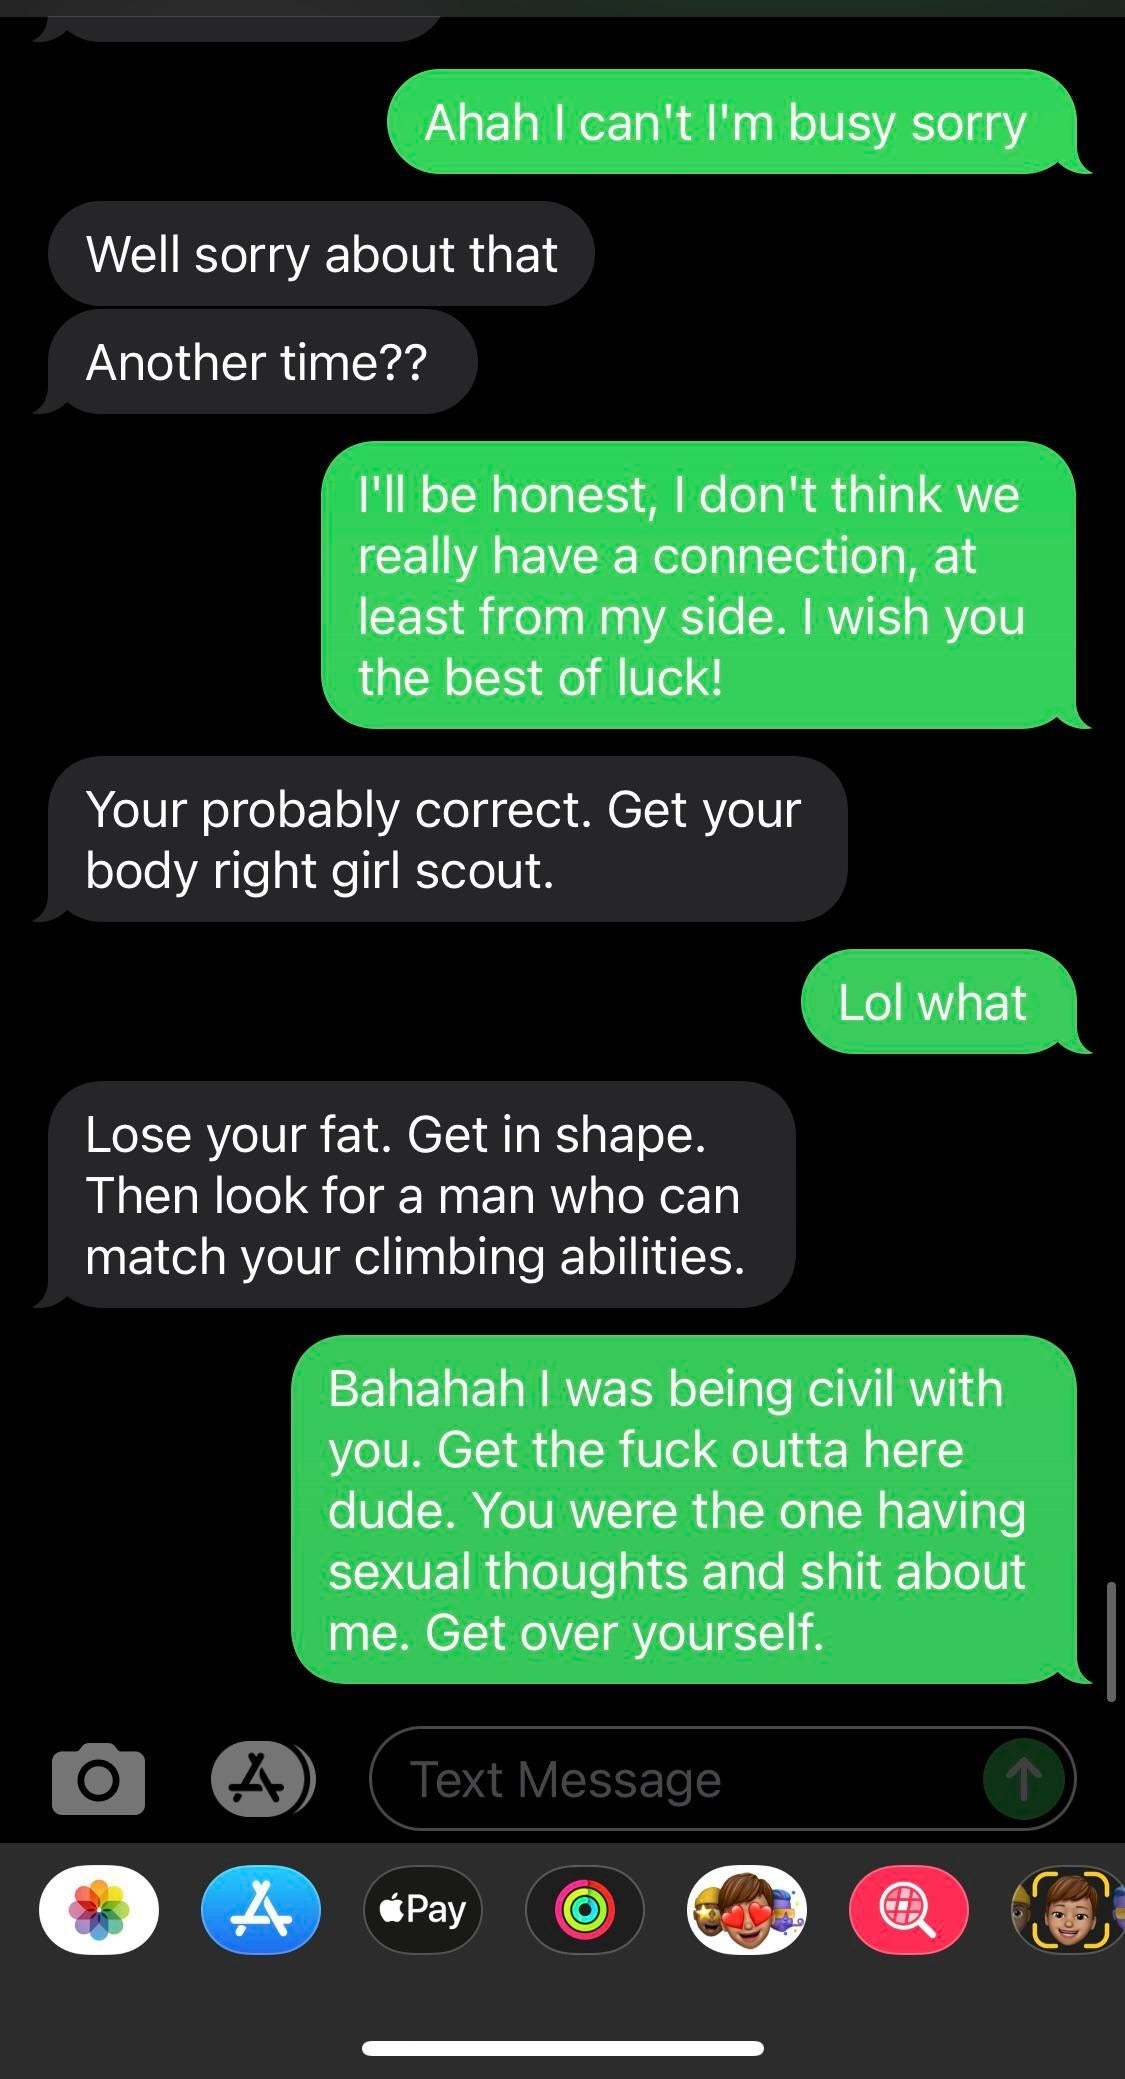 Woman says there isn&#x27;t a connection and guy says to get her body right and lose her fat and get in shape, and the girl says she was being civil and he should get over himself